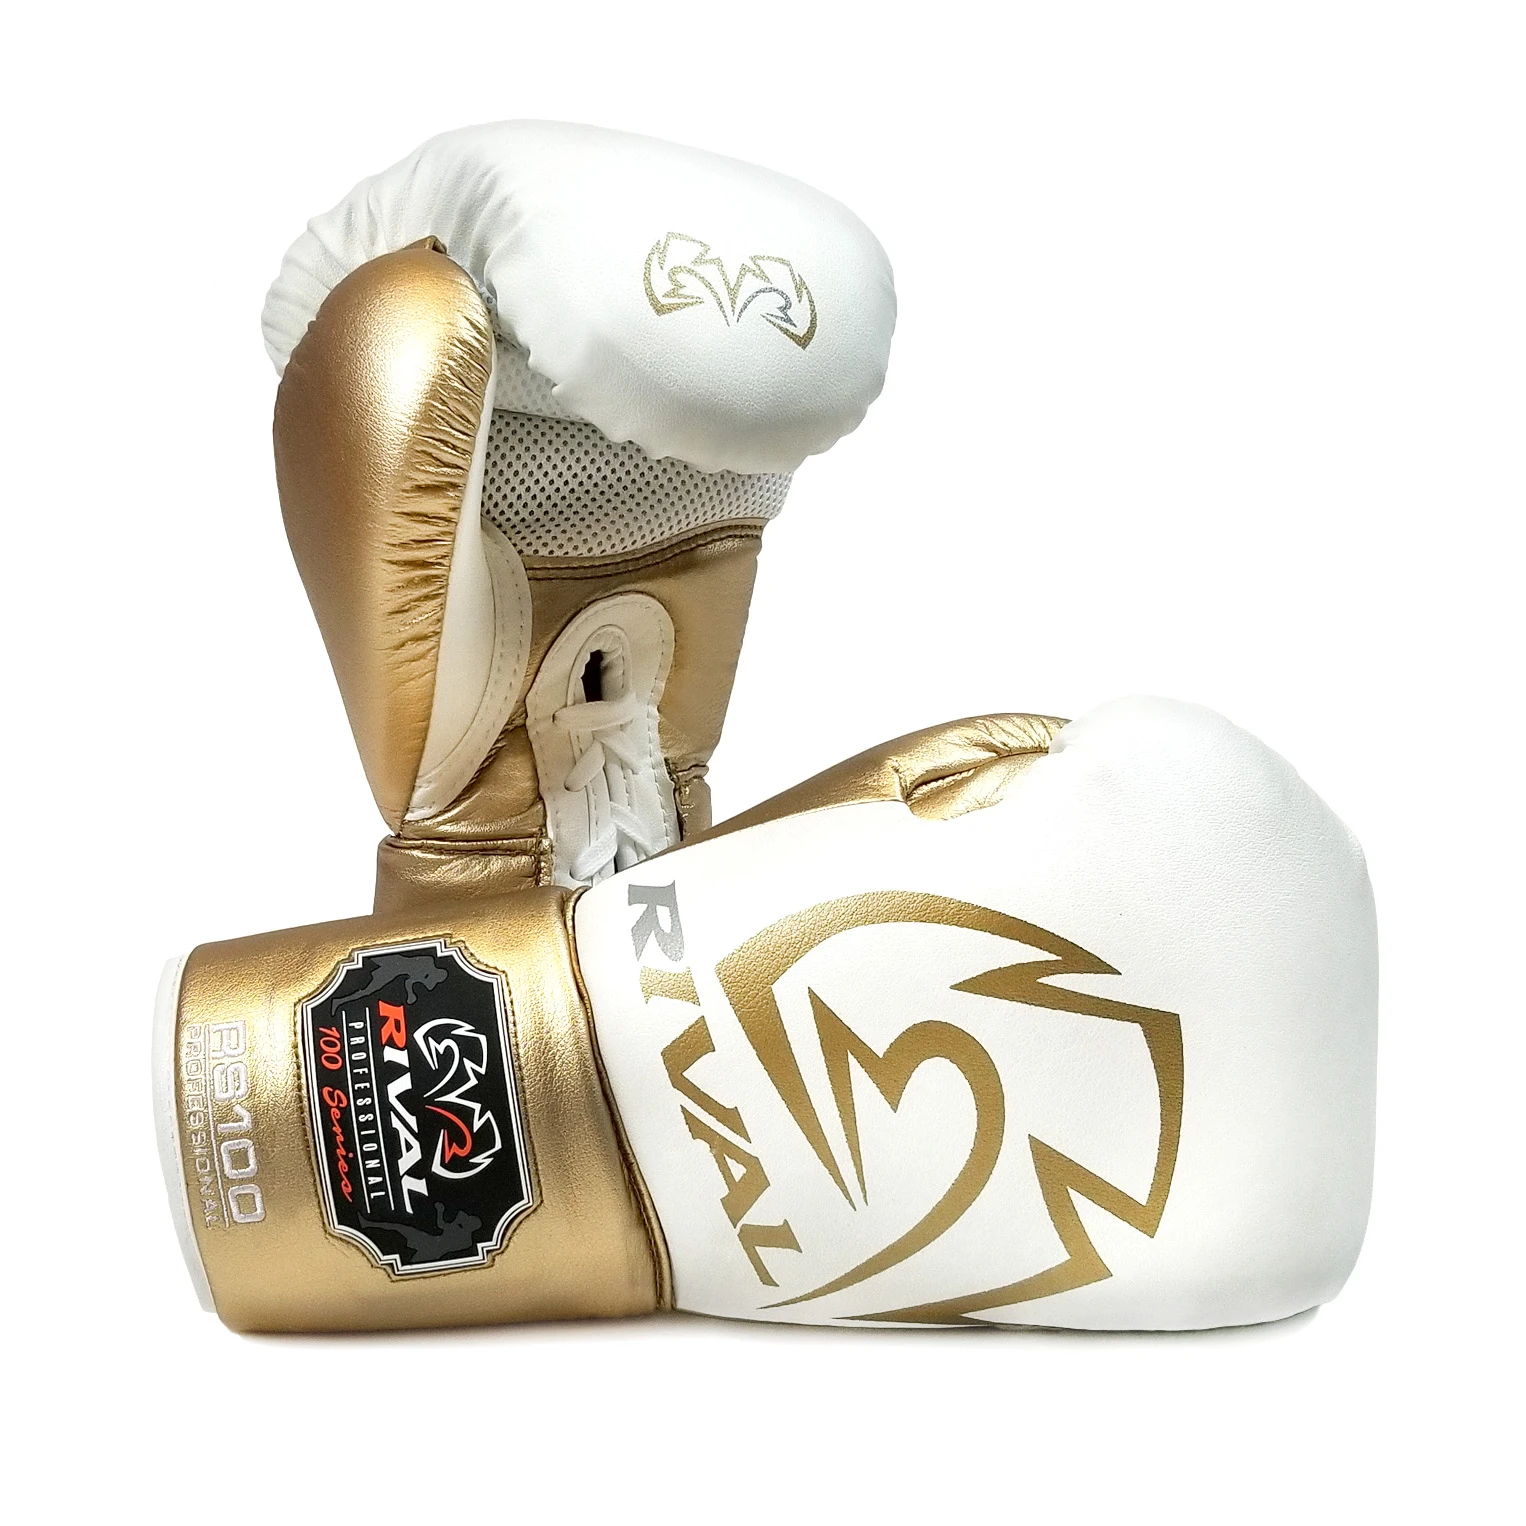 RIVAL: RS100 PROFESSIONAL SPARRING BOXING GLOVES - WHITE/GOLD